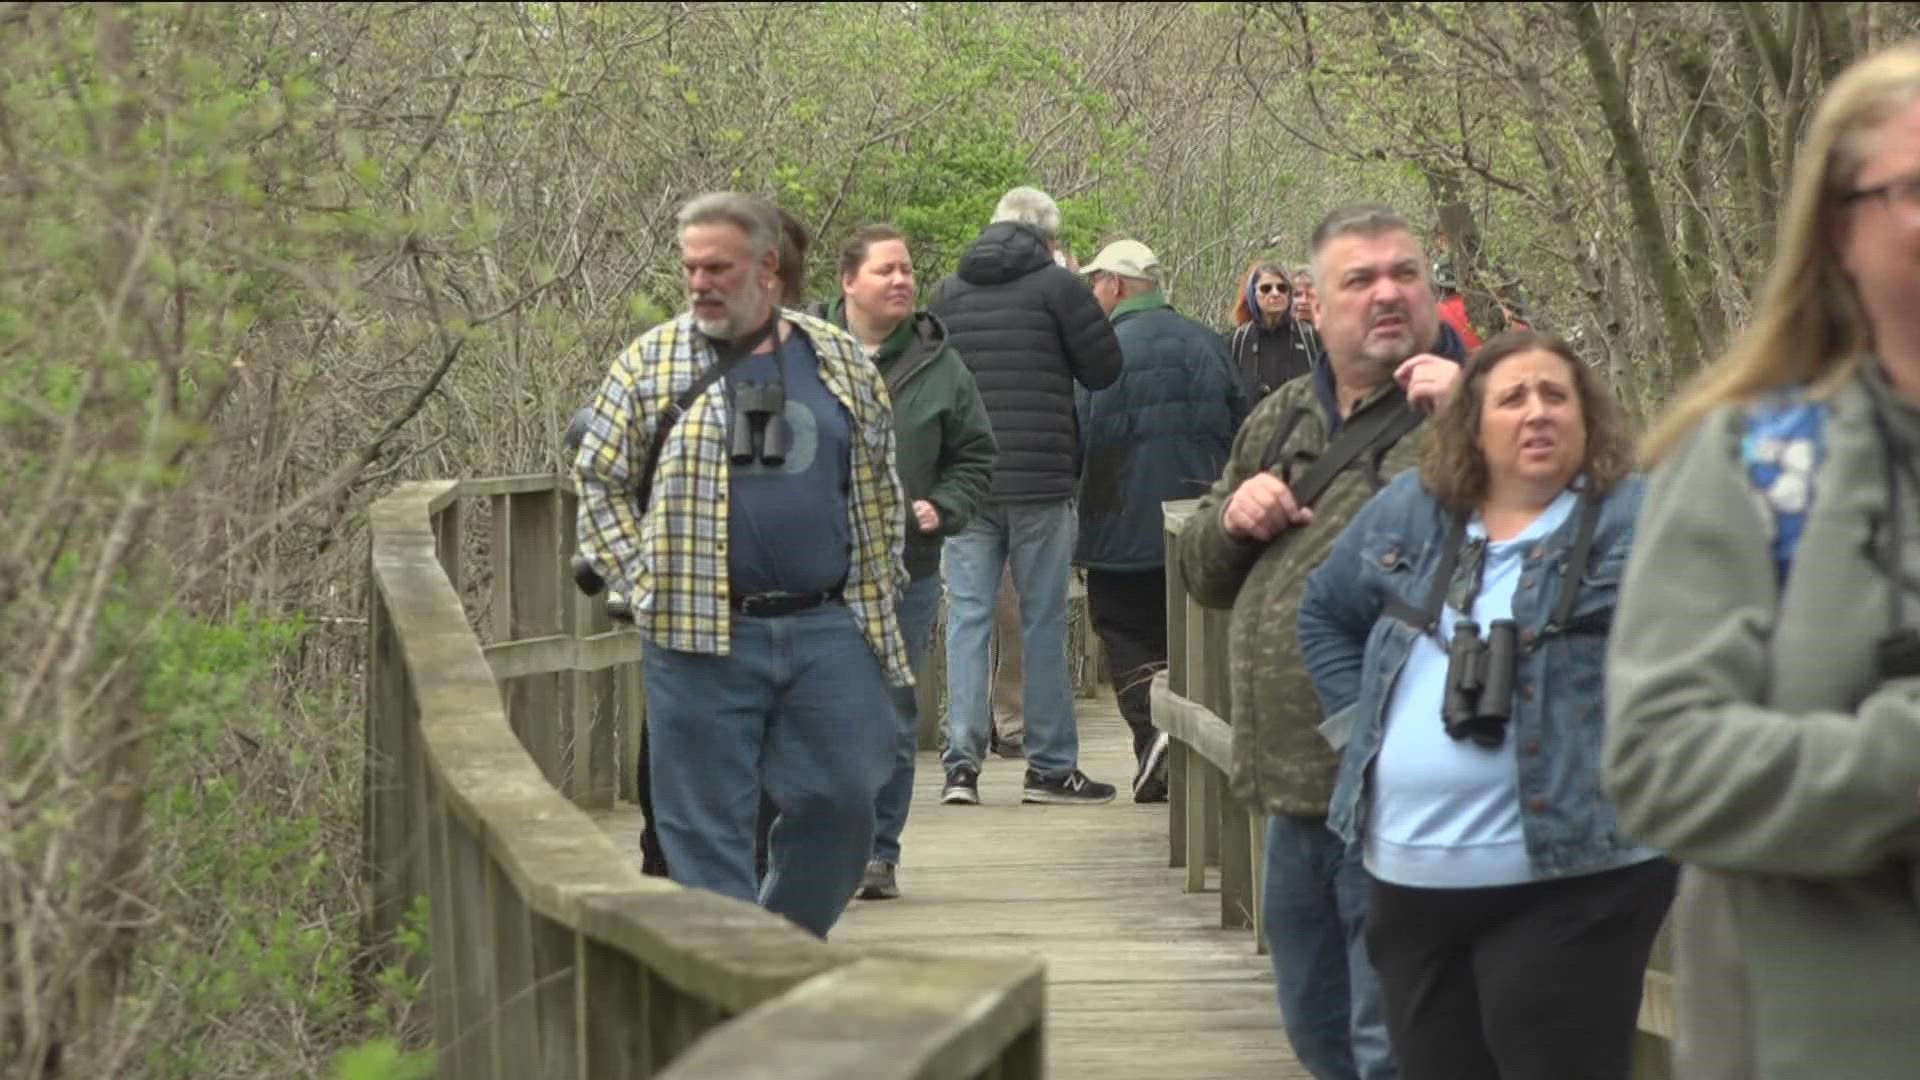 As many as 100,000 birders are anticipated to visit northwest Ohio over the next month.